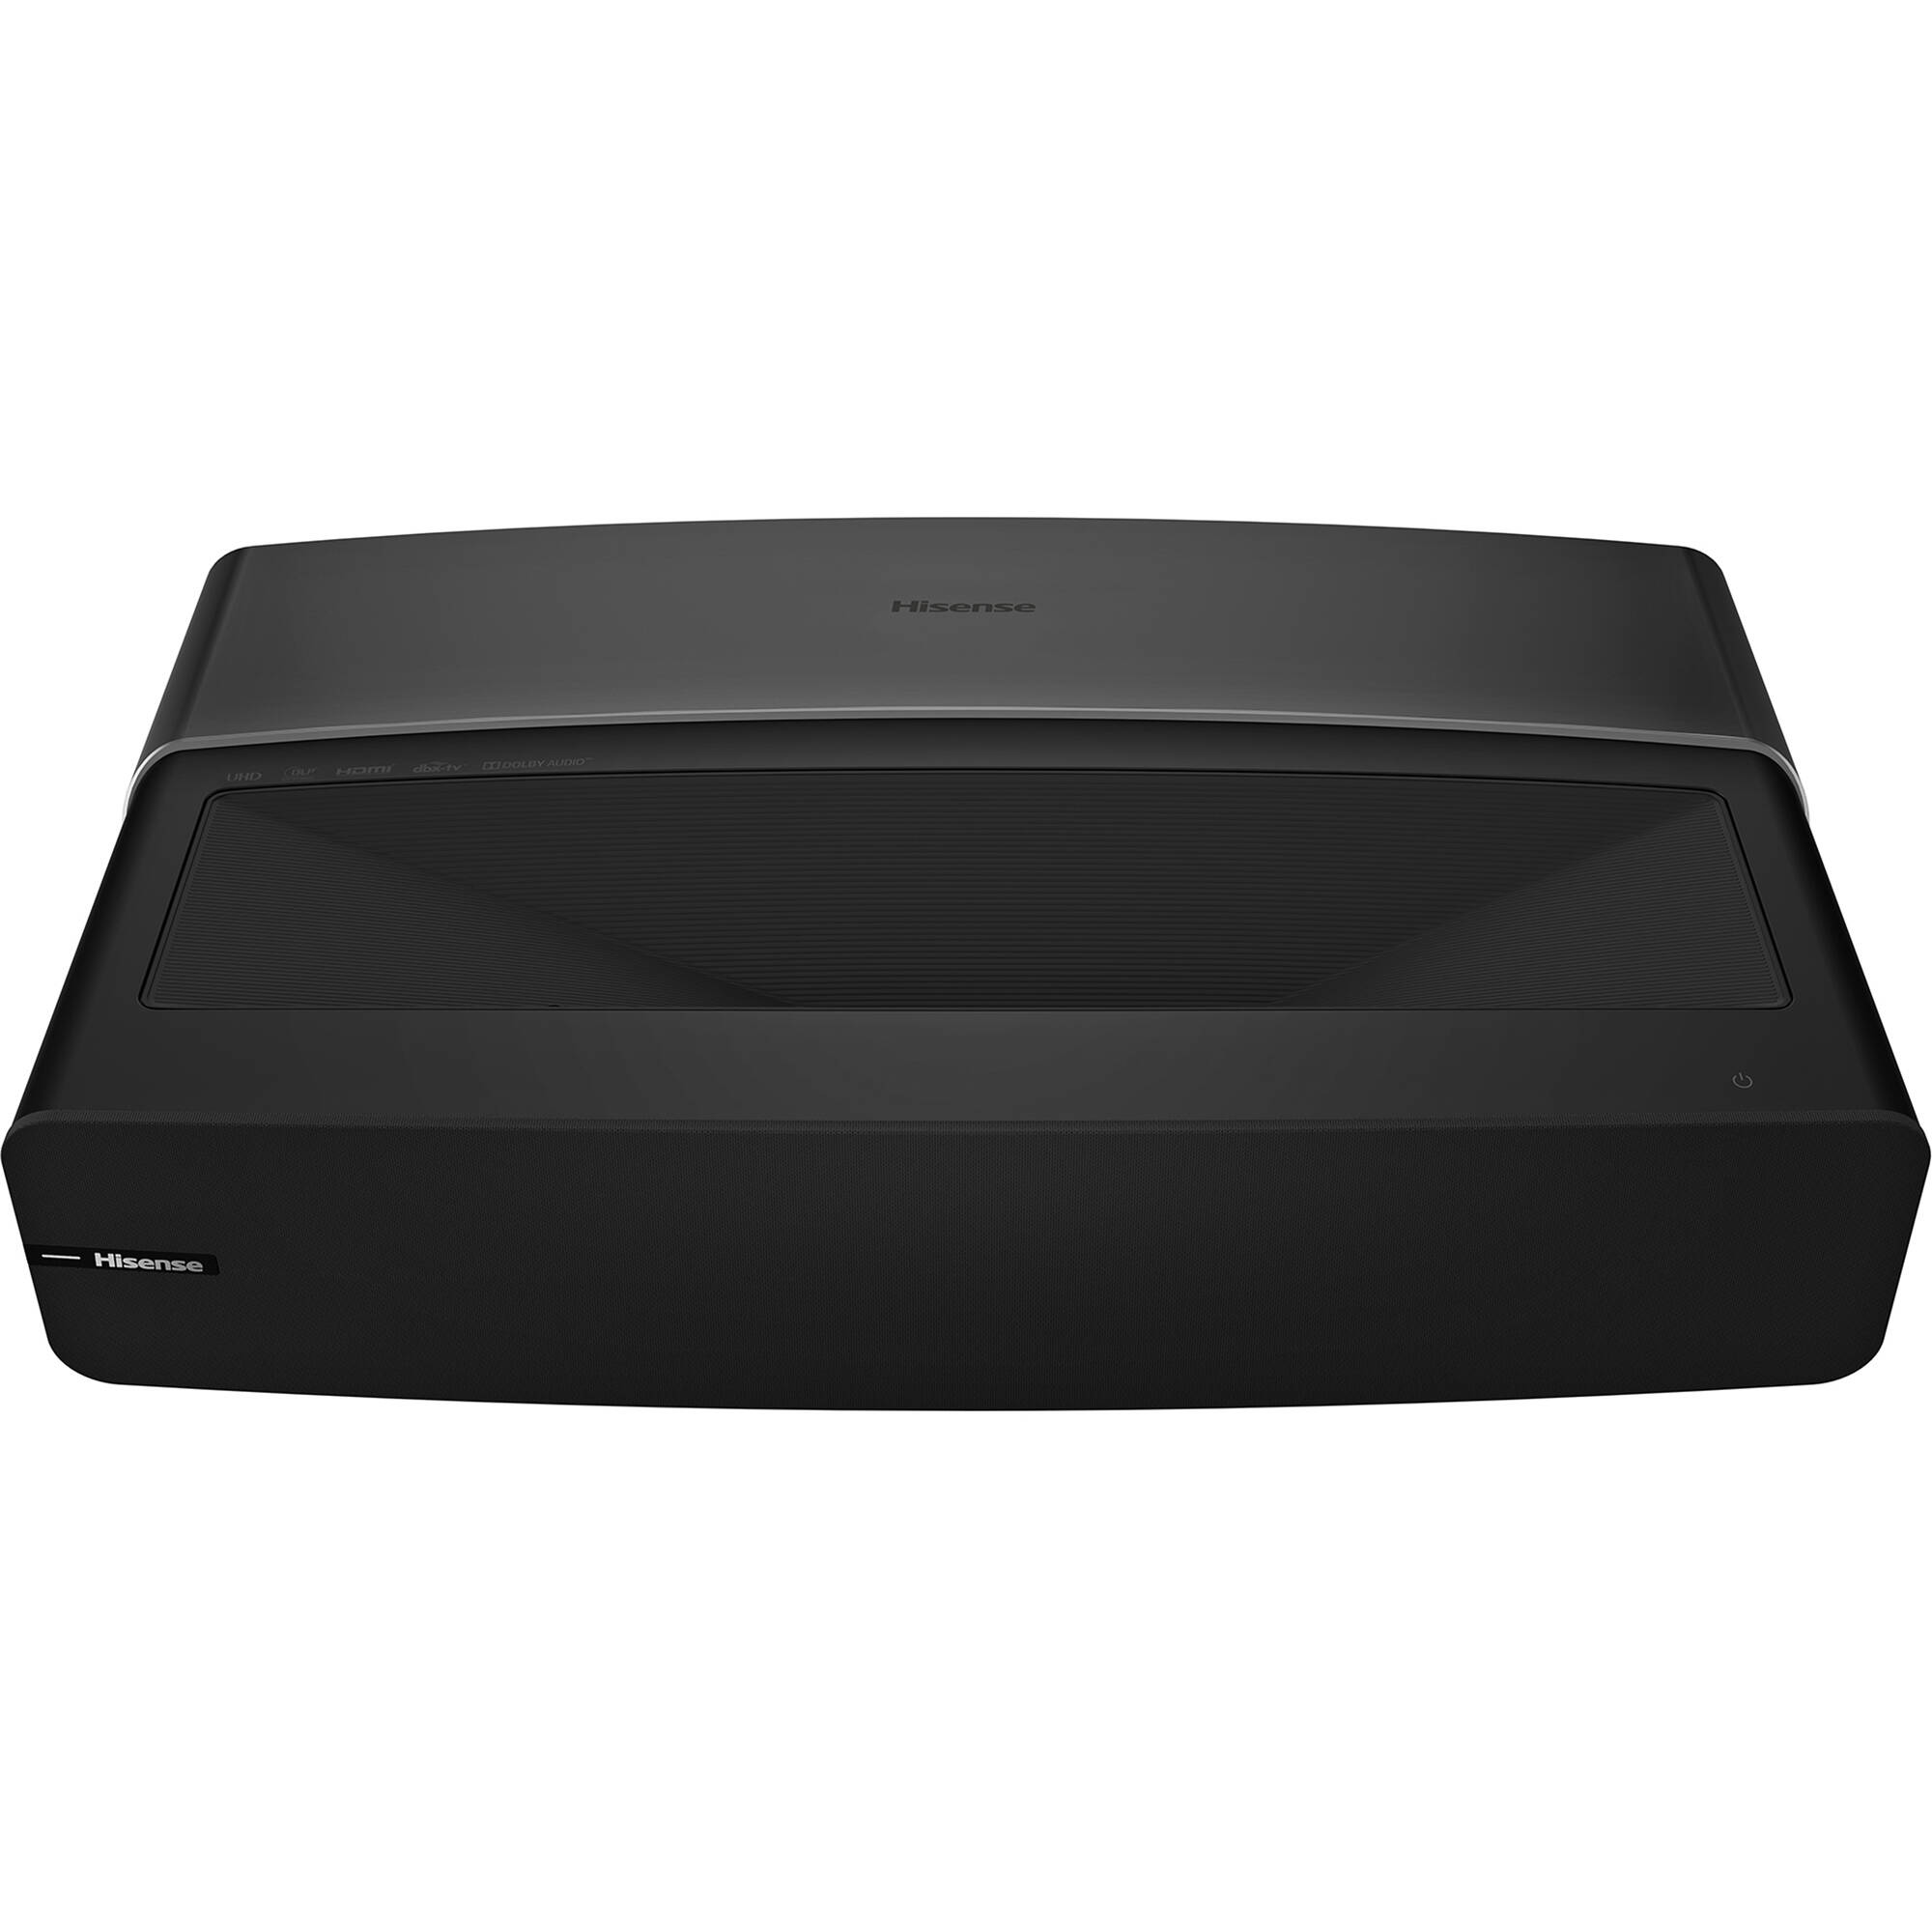 Hisense 100L5F-RB 100" UHD Android Smart Short Throw Projector - Certified Refurbished